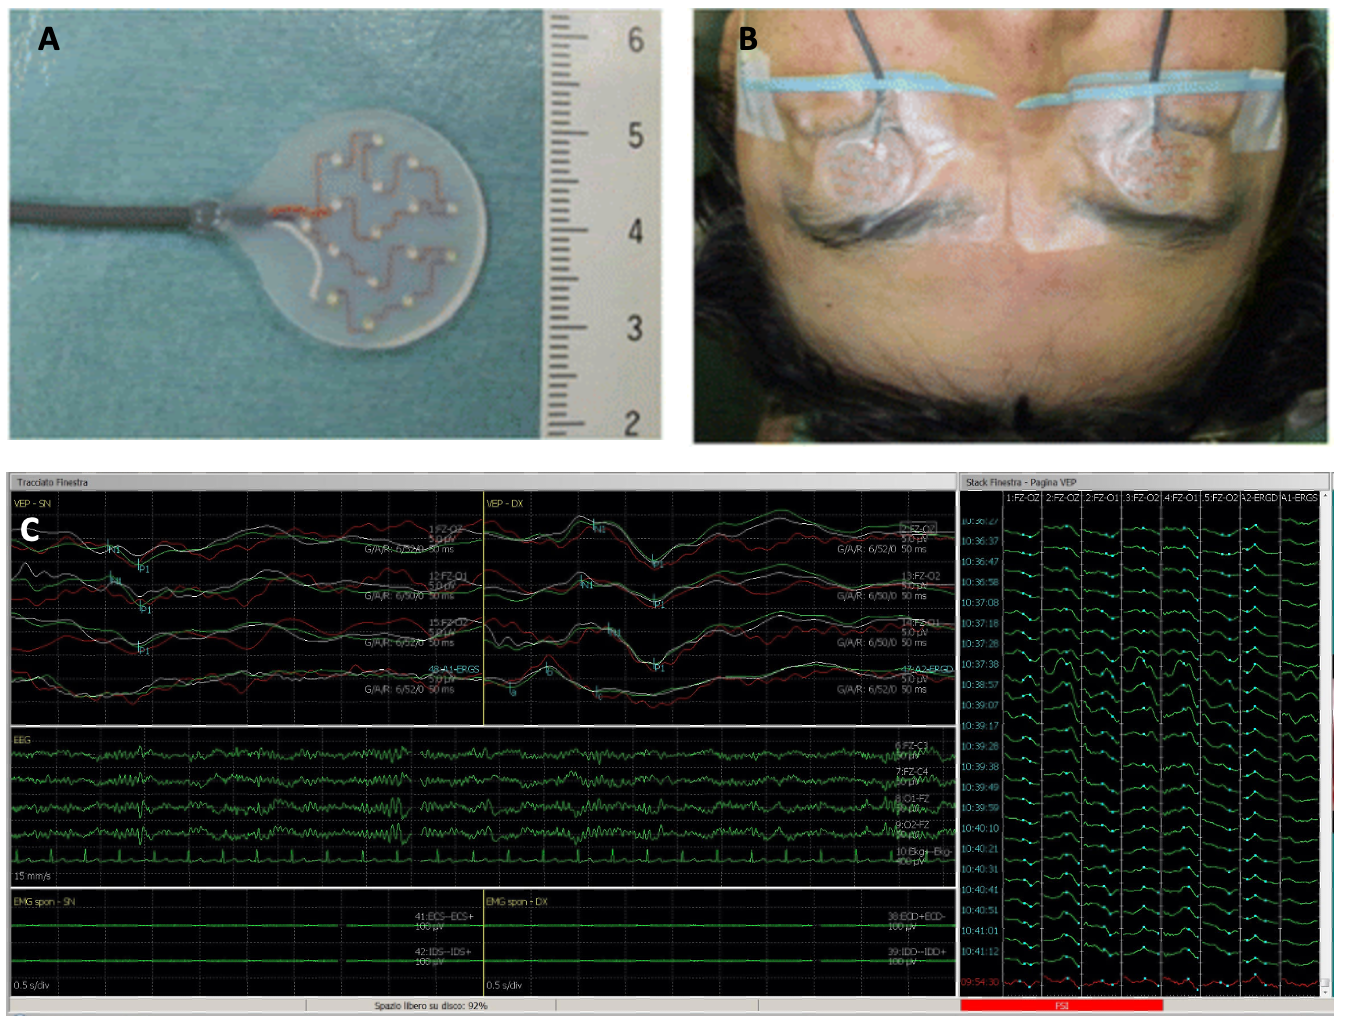 Flash stimulation pads used for surgical intraoperative monitoring. Intraoperative visual evoked potentials (VEPs) results.